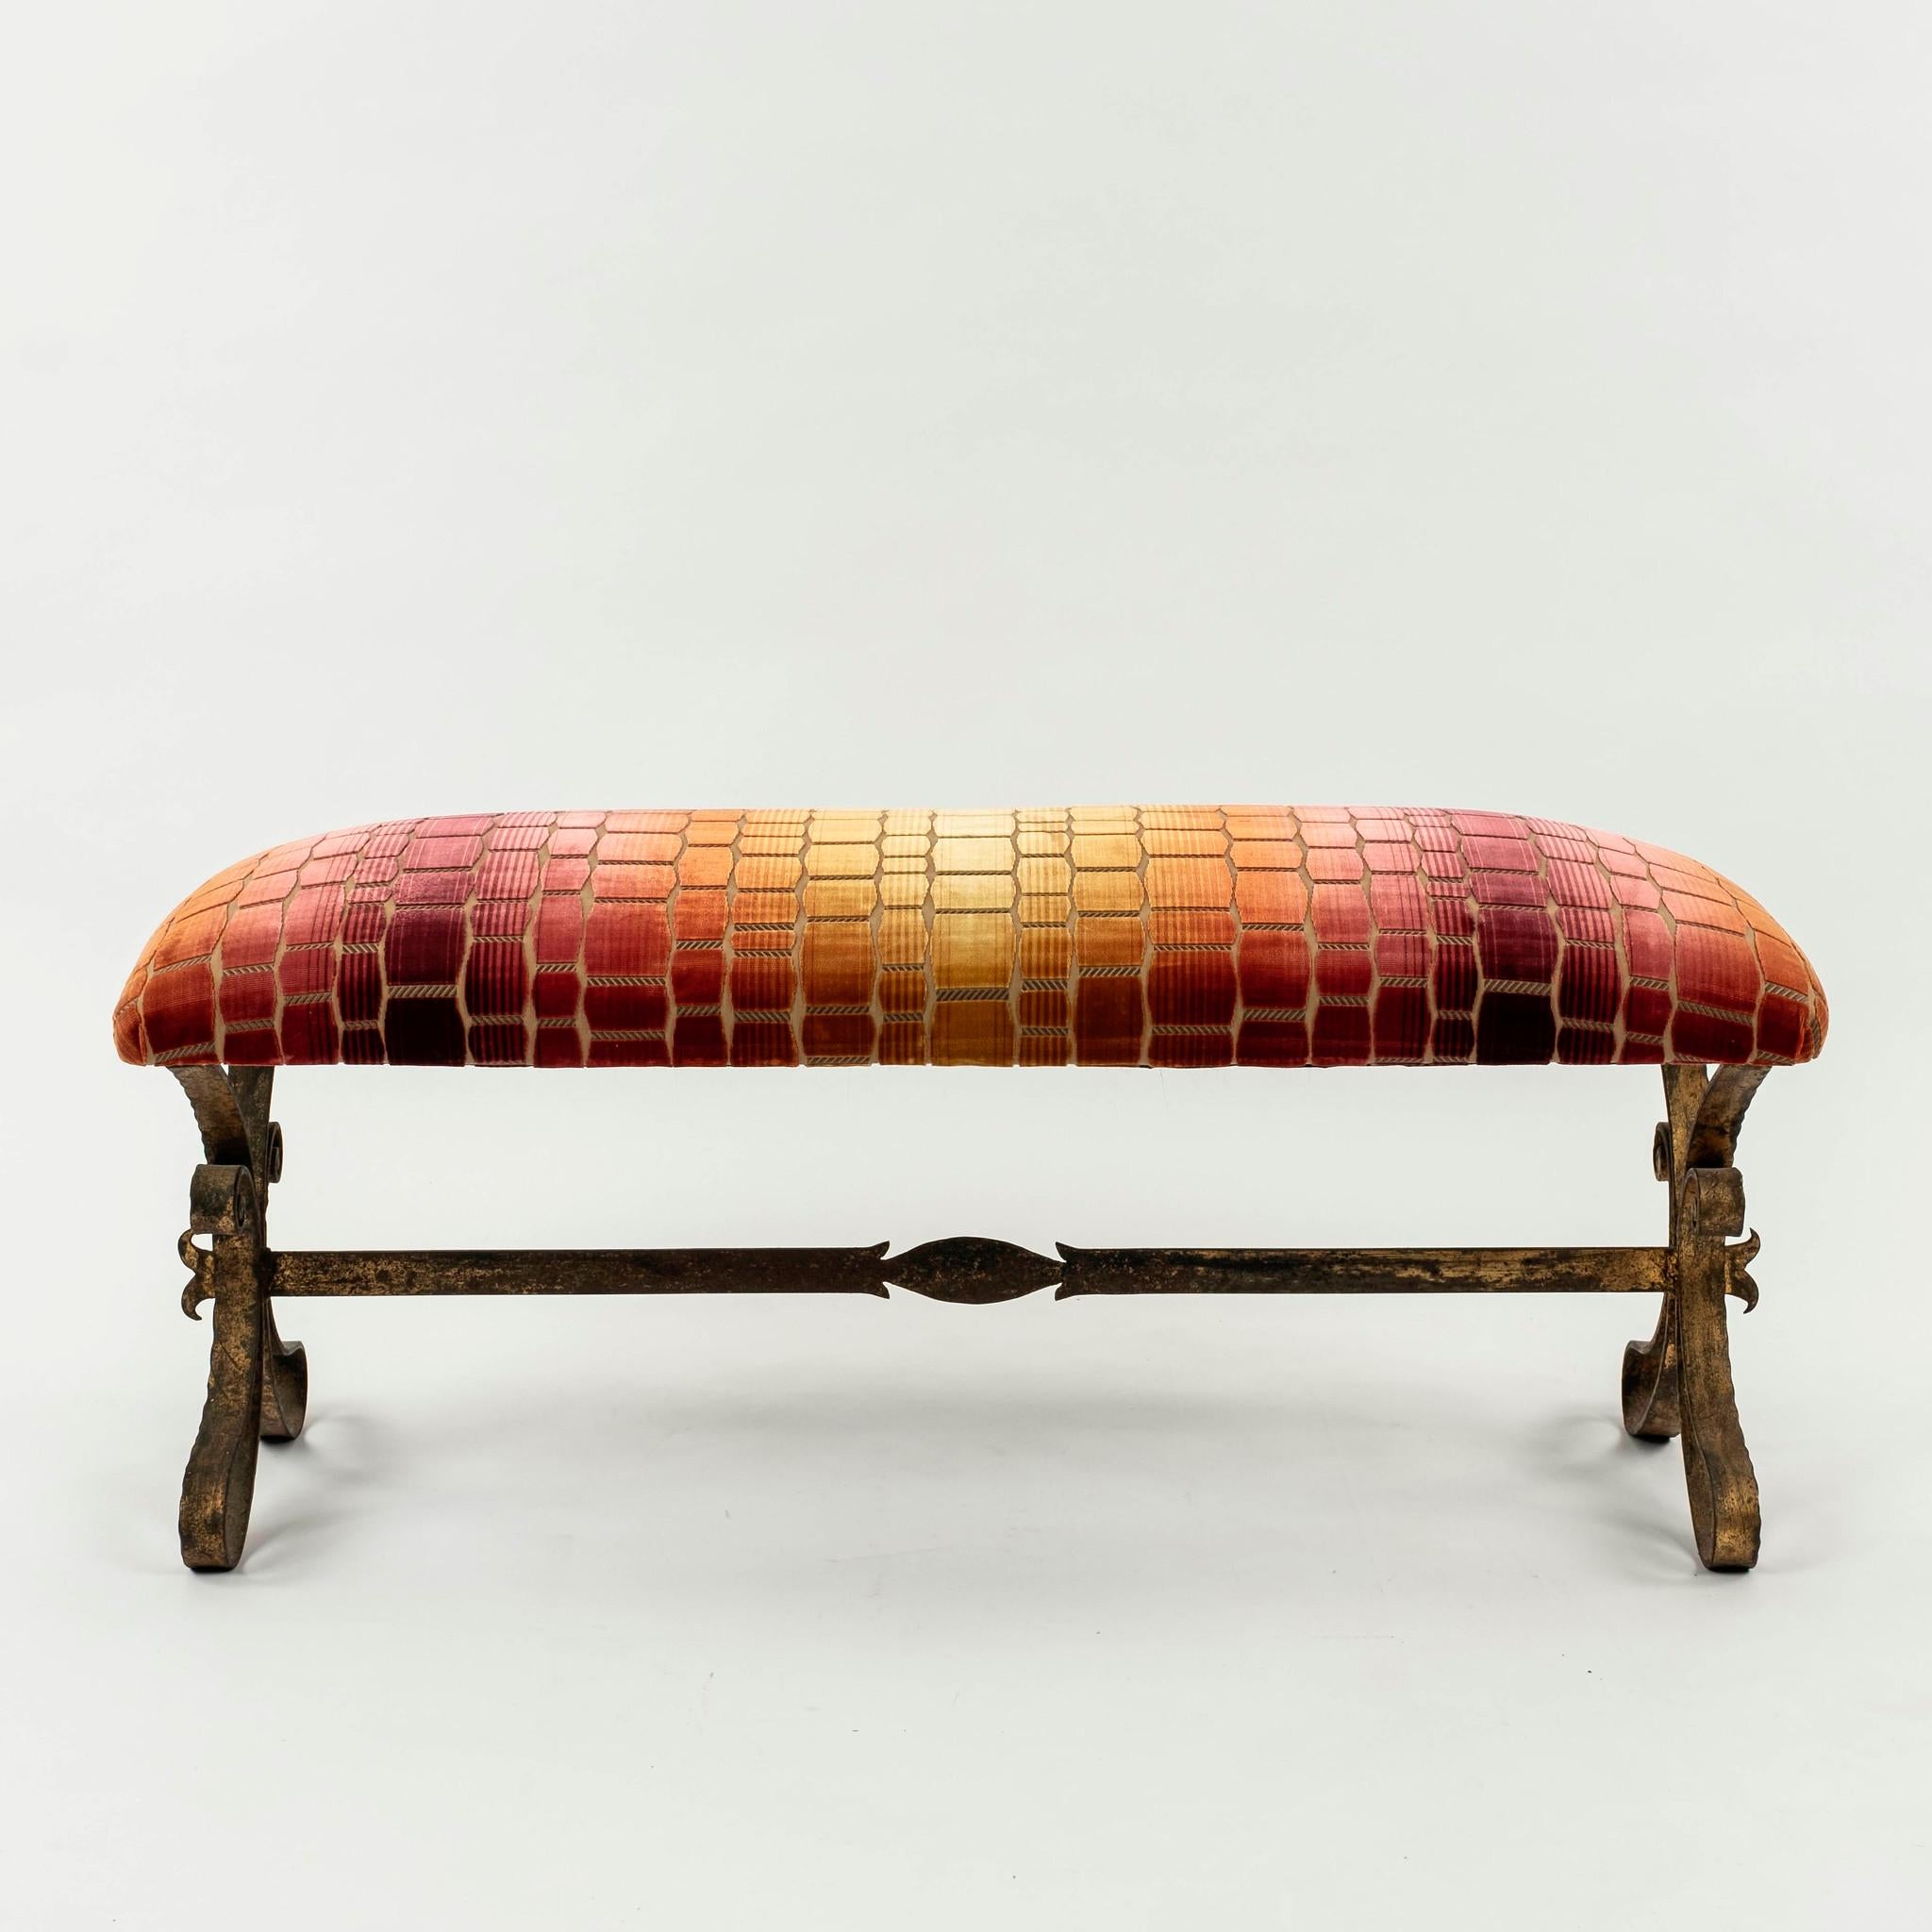 Italian gilt iron bench upholstered in a geometric cut velvet with undulating hues of yellow, pink, and red tones.